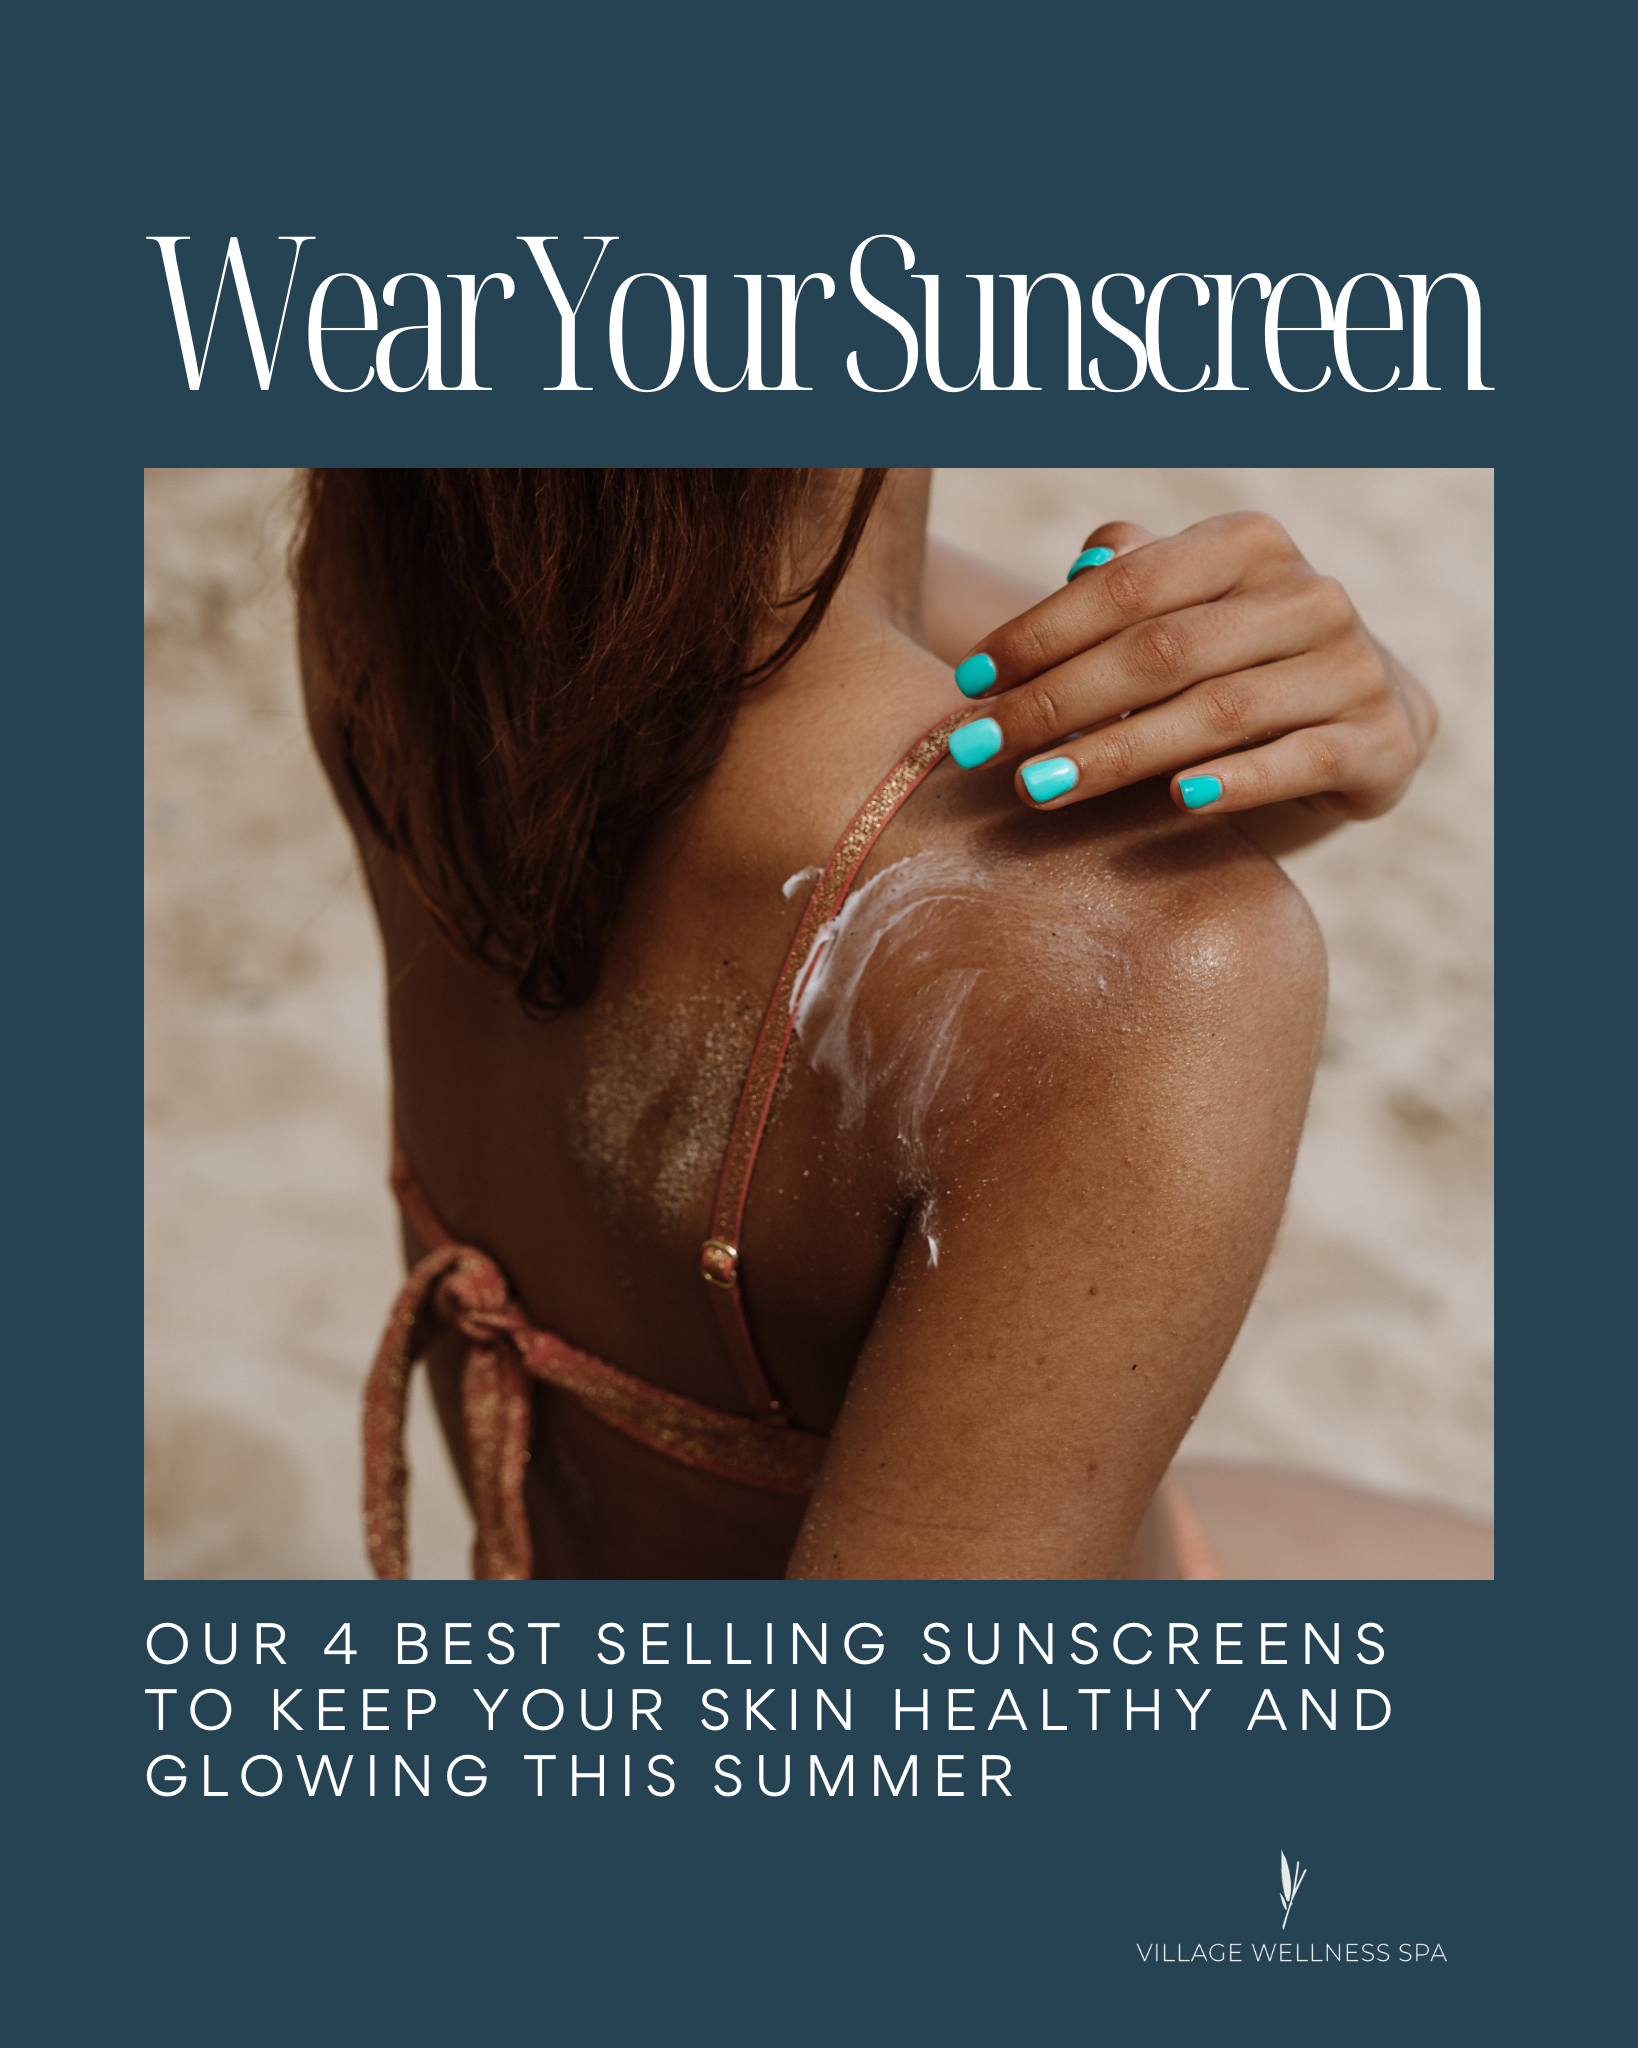 Our 4 Best Selling Sunscreens To Keep Your Skin Healthy And Glowing This Summer